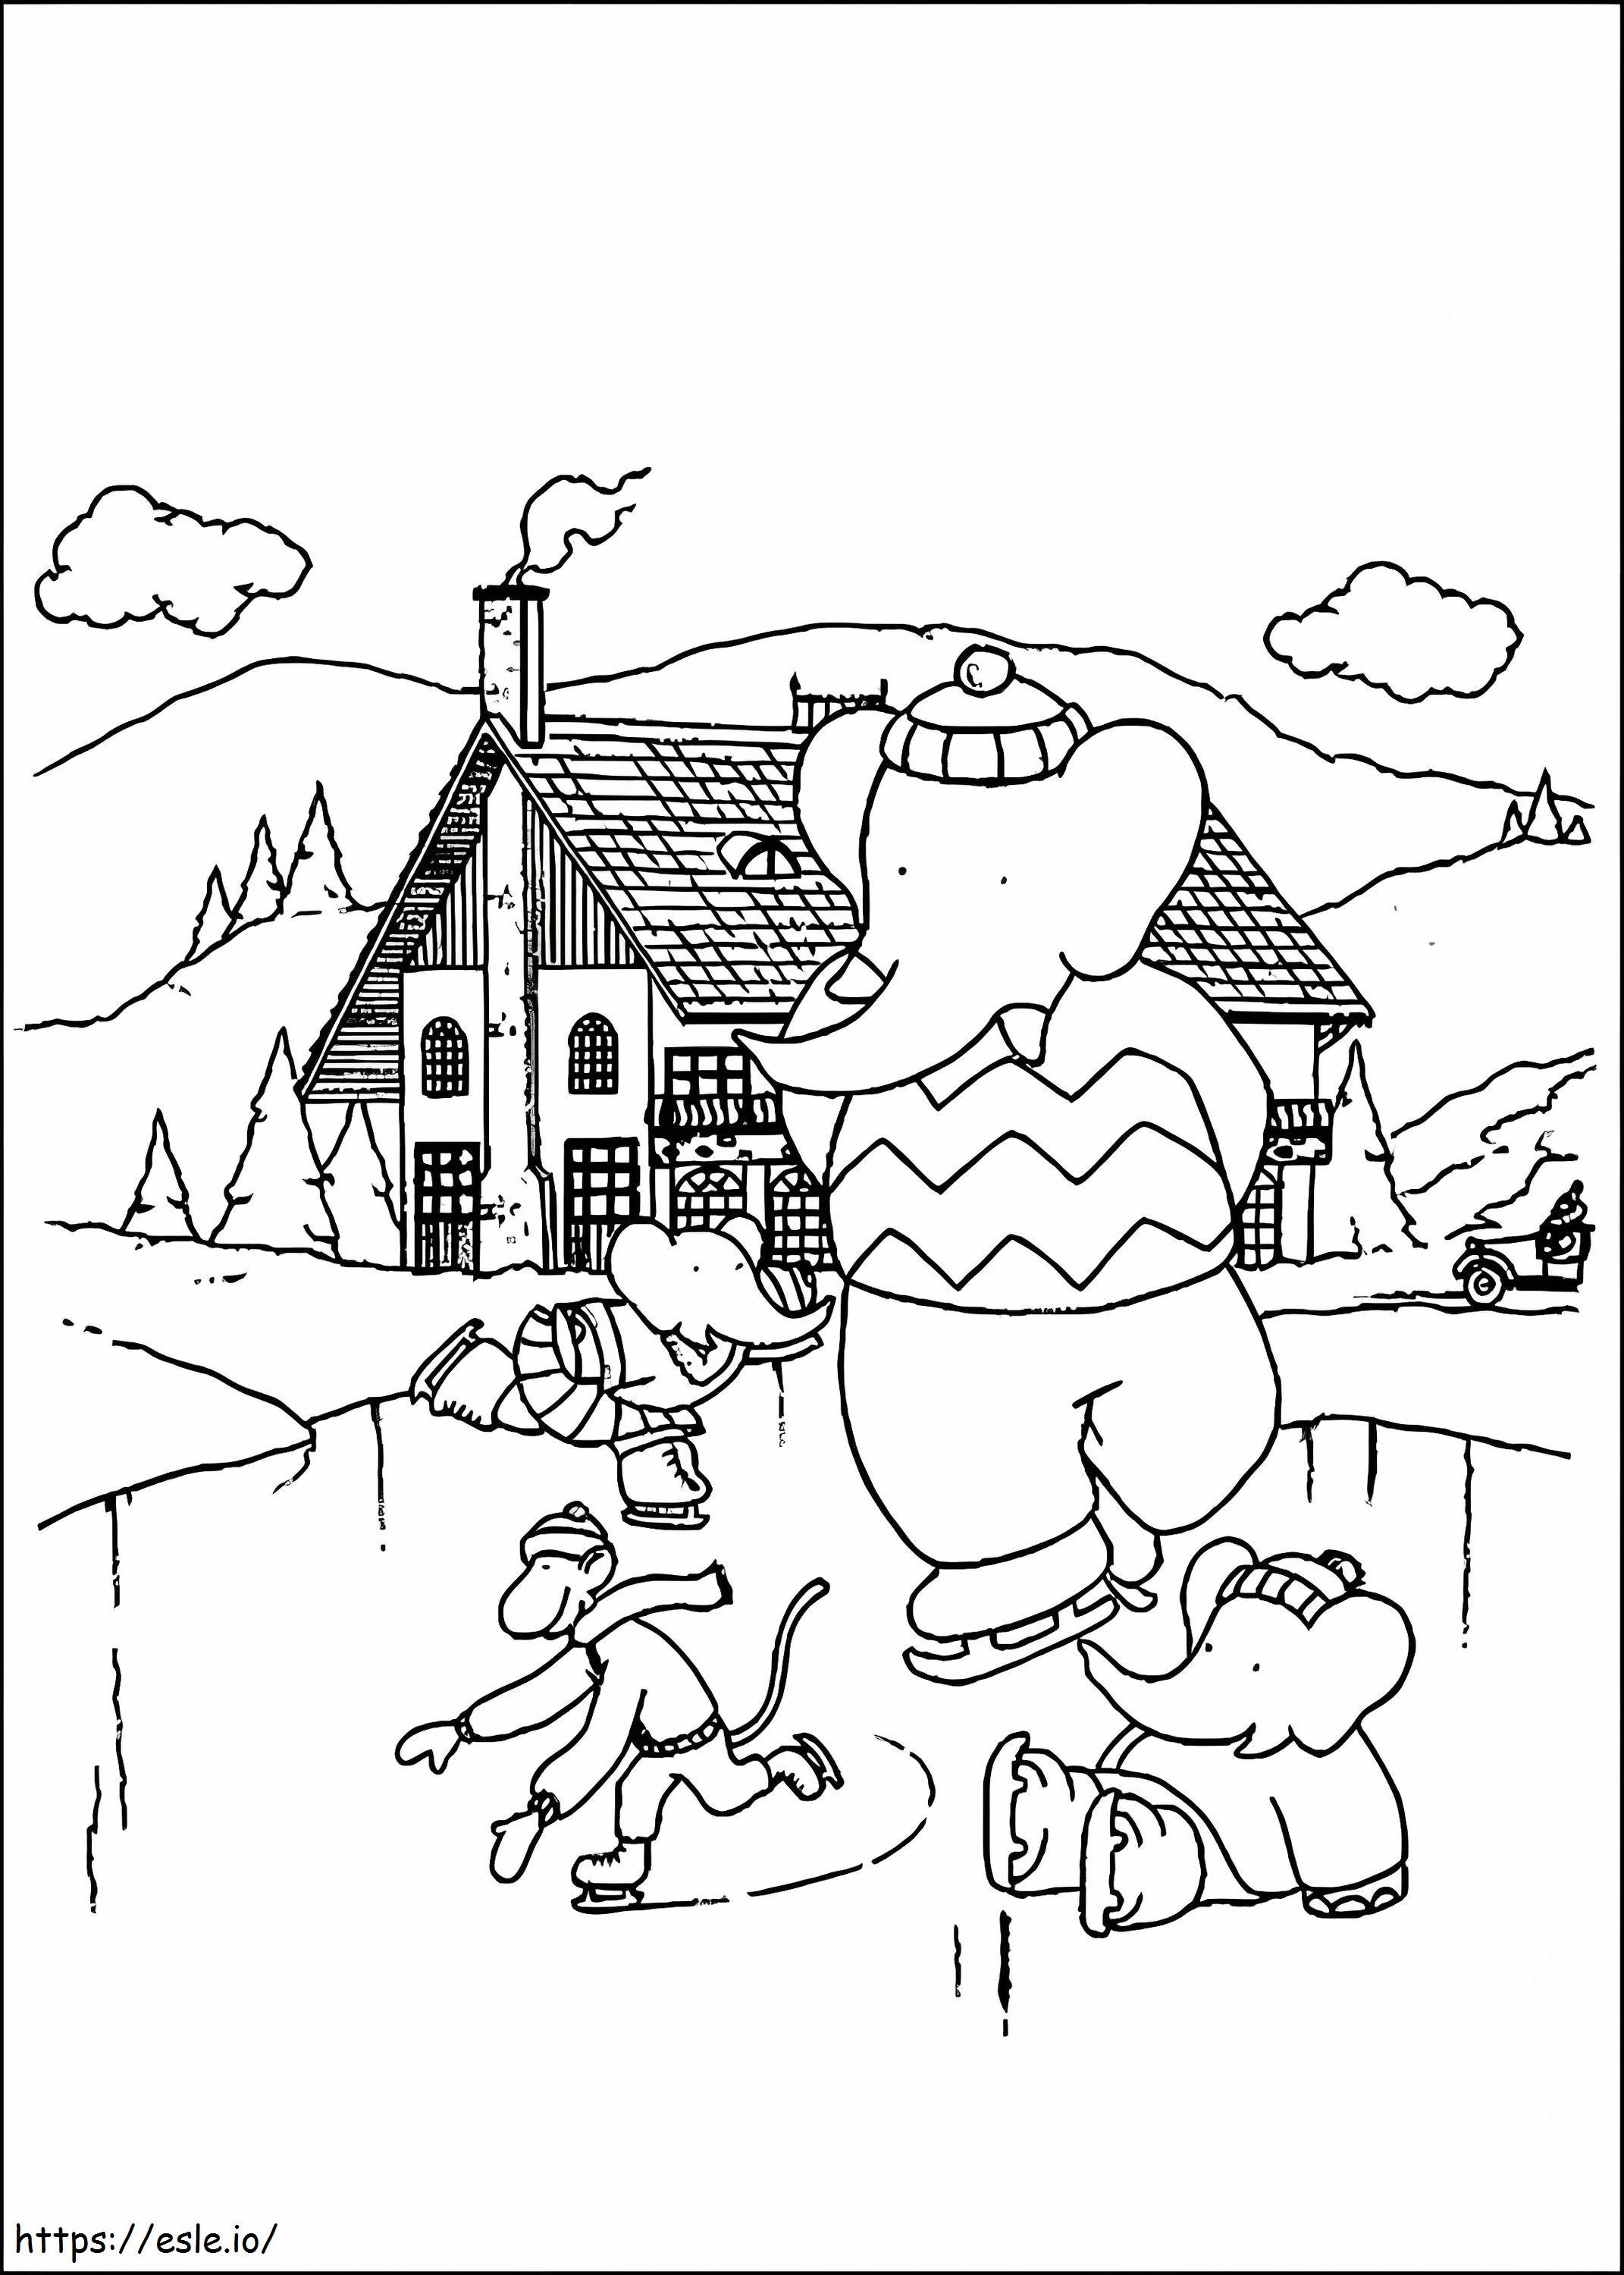 Monkey And Elephant Play Ice Skating coloring page